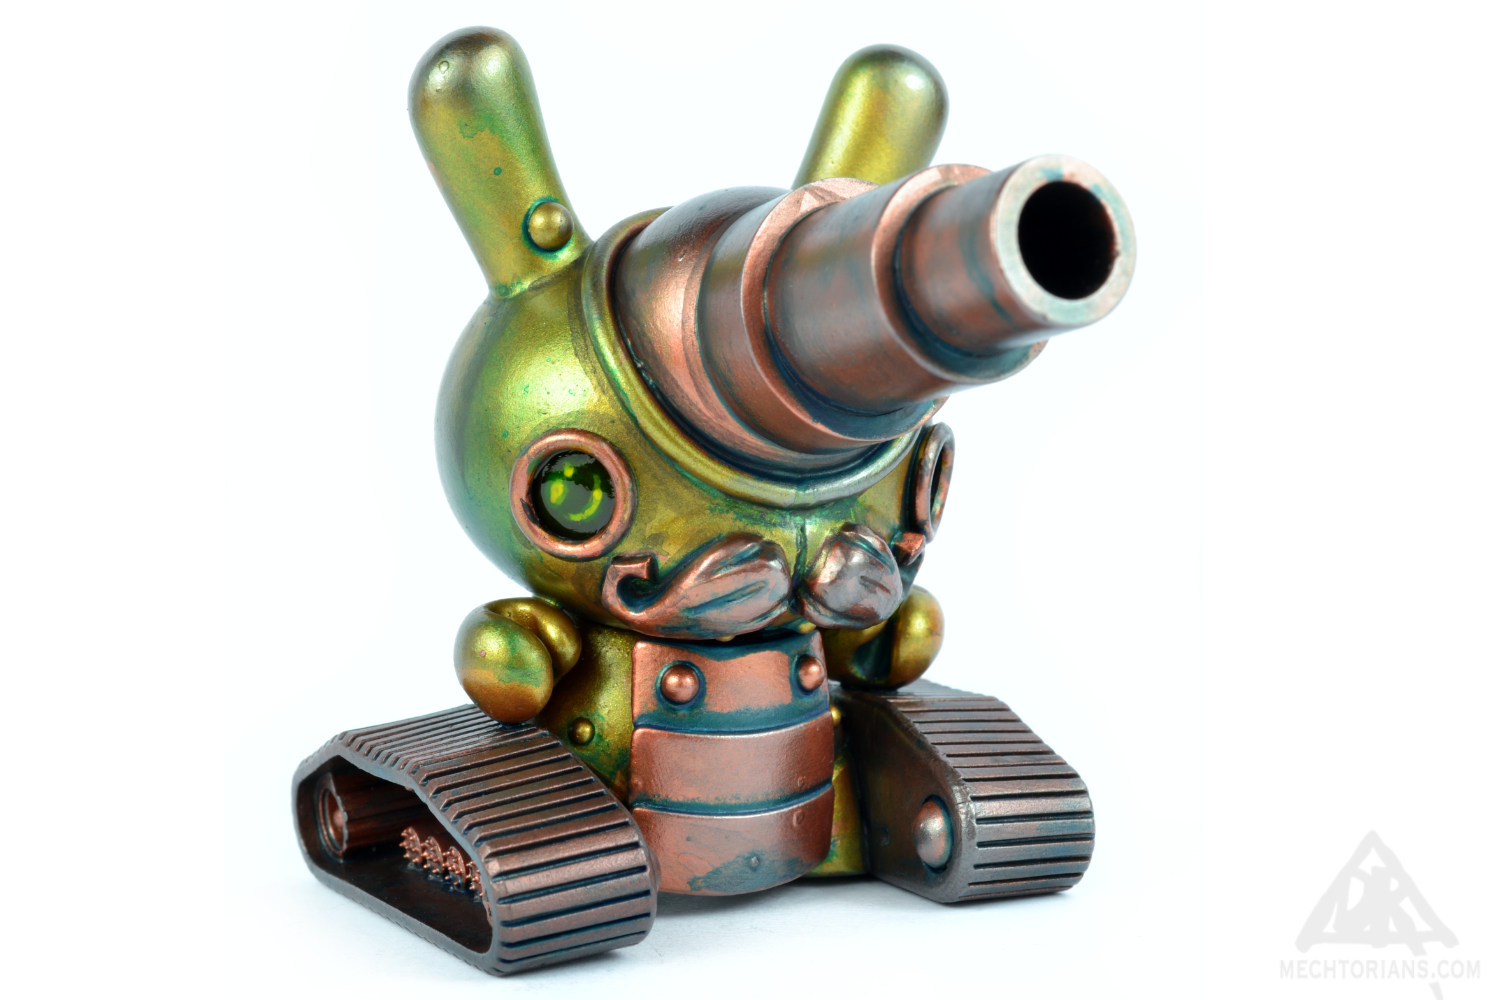 Sherman Smoothbore. A Tank shaped Mechtorian Customised 3" Dunny by Doktor A. Bruce Whistlecraft.